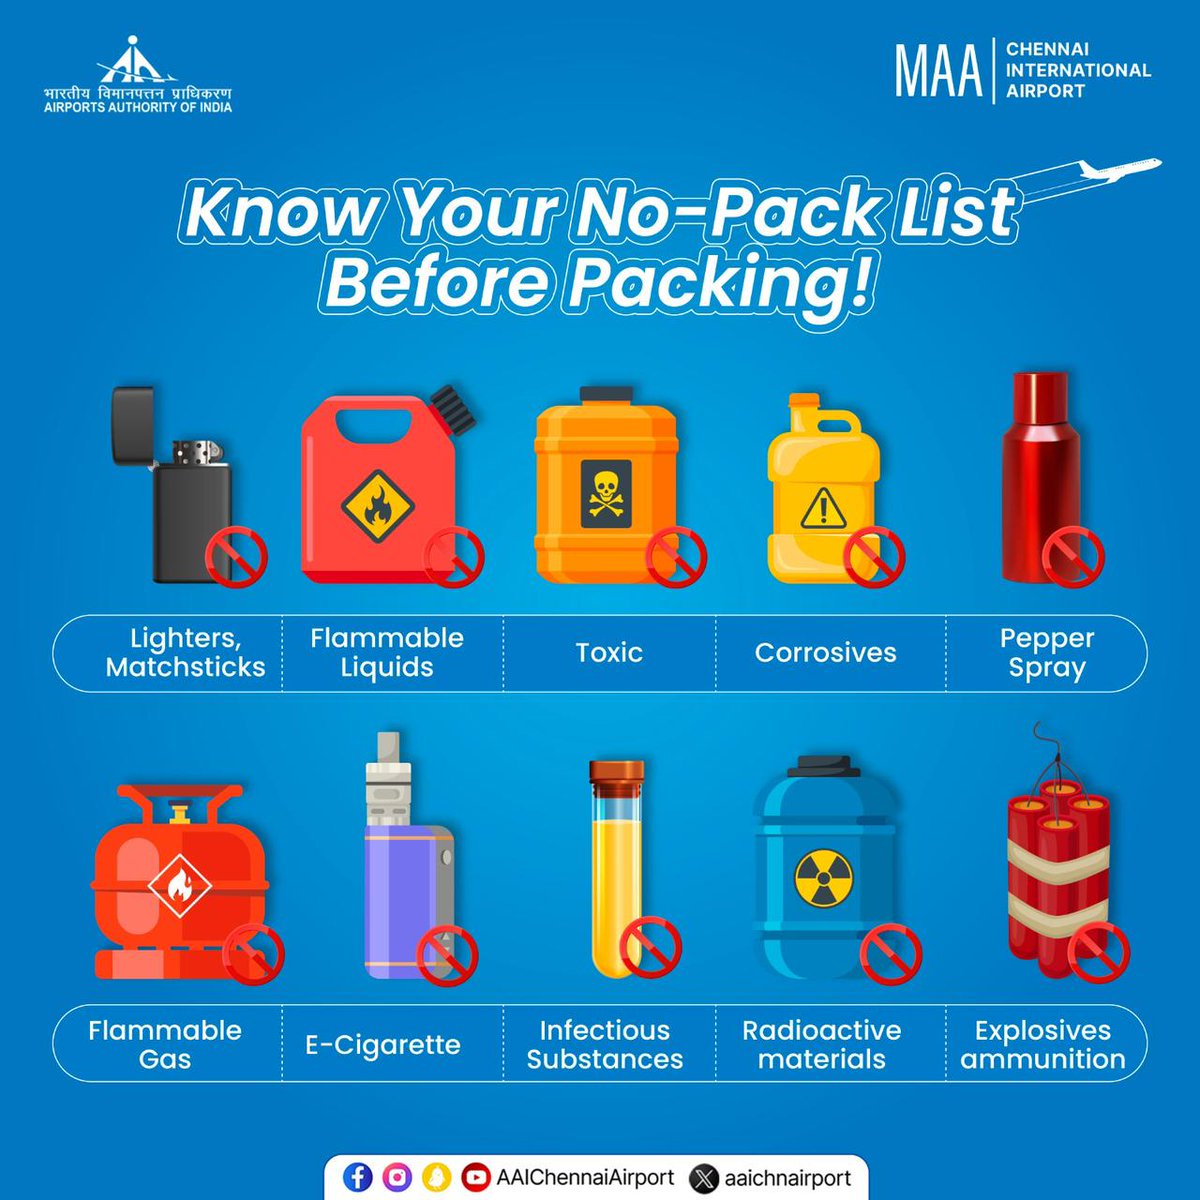 Smooth travels start with smart packing! Check out this list of prohibited items before you pack to breeze through security at Chennai International Airport. #ChennaiAirport #ProhibitedItems #SmoothTravel @MoCA_GoI | @AAI_Official